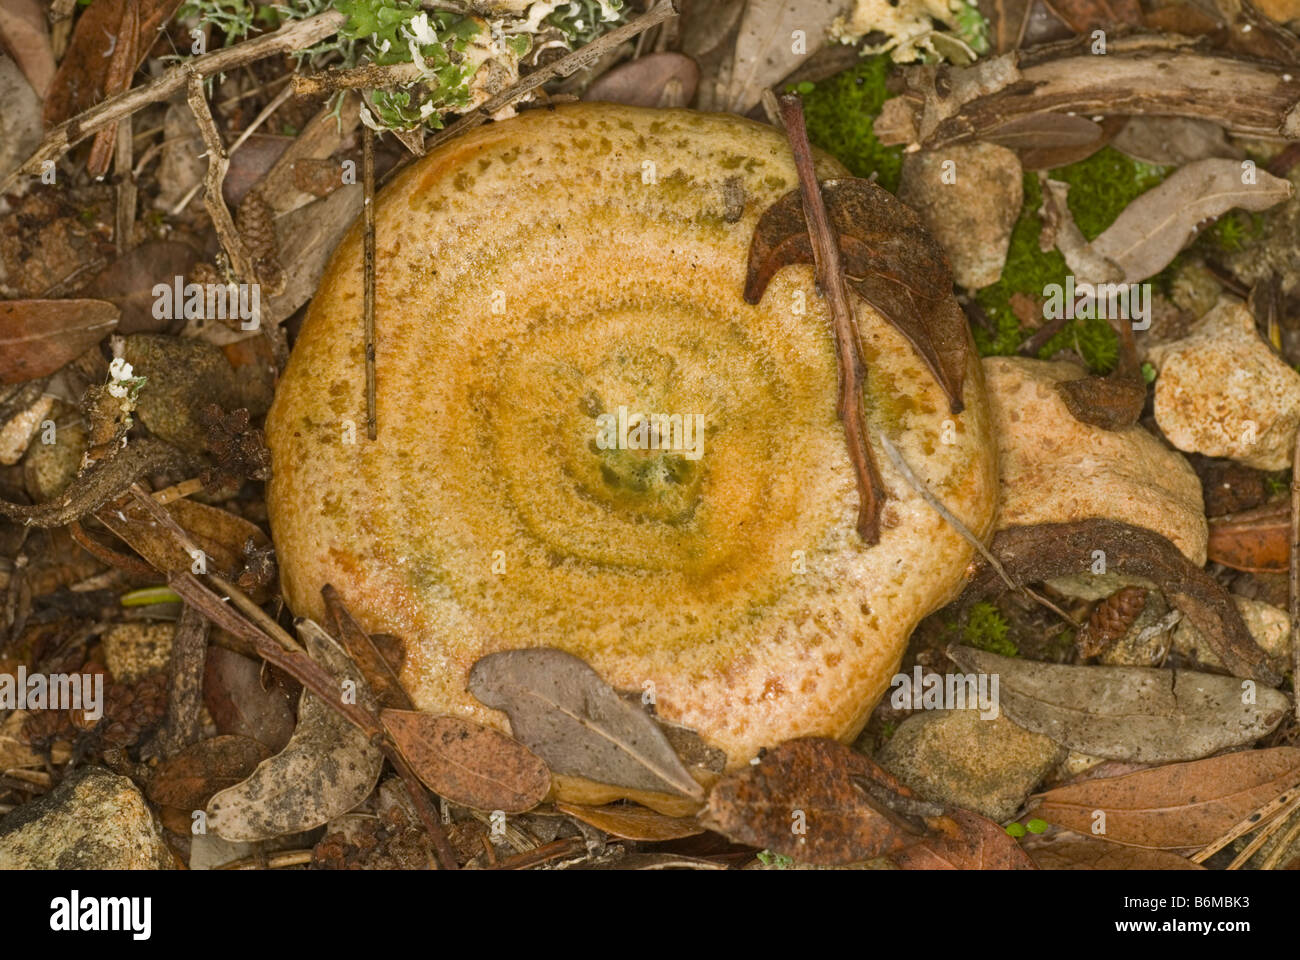 Red pine mushroom seen from above Stock Photo